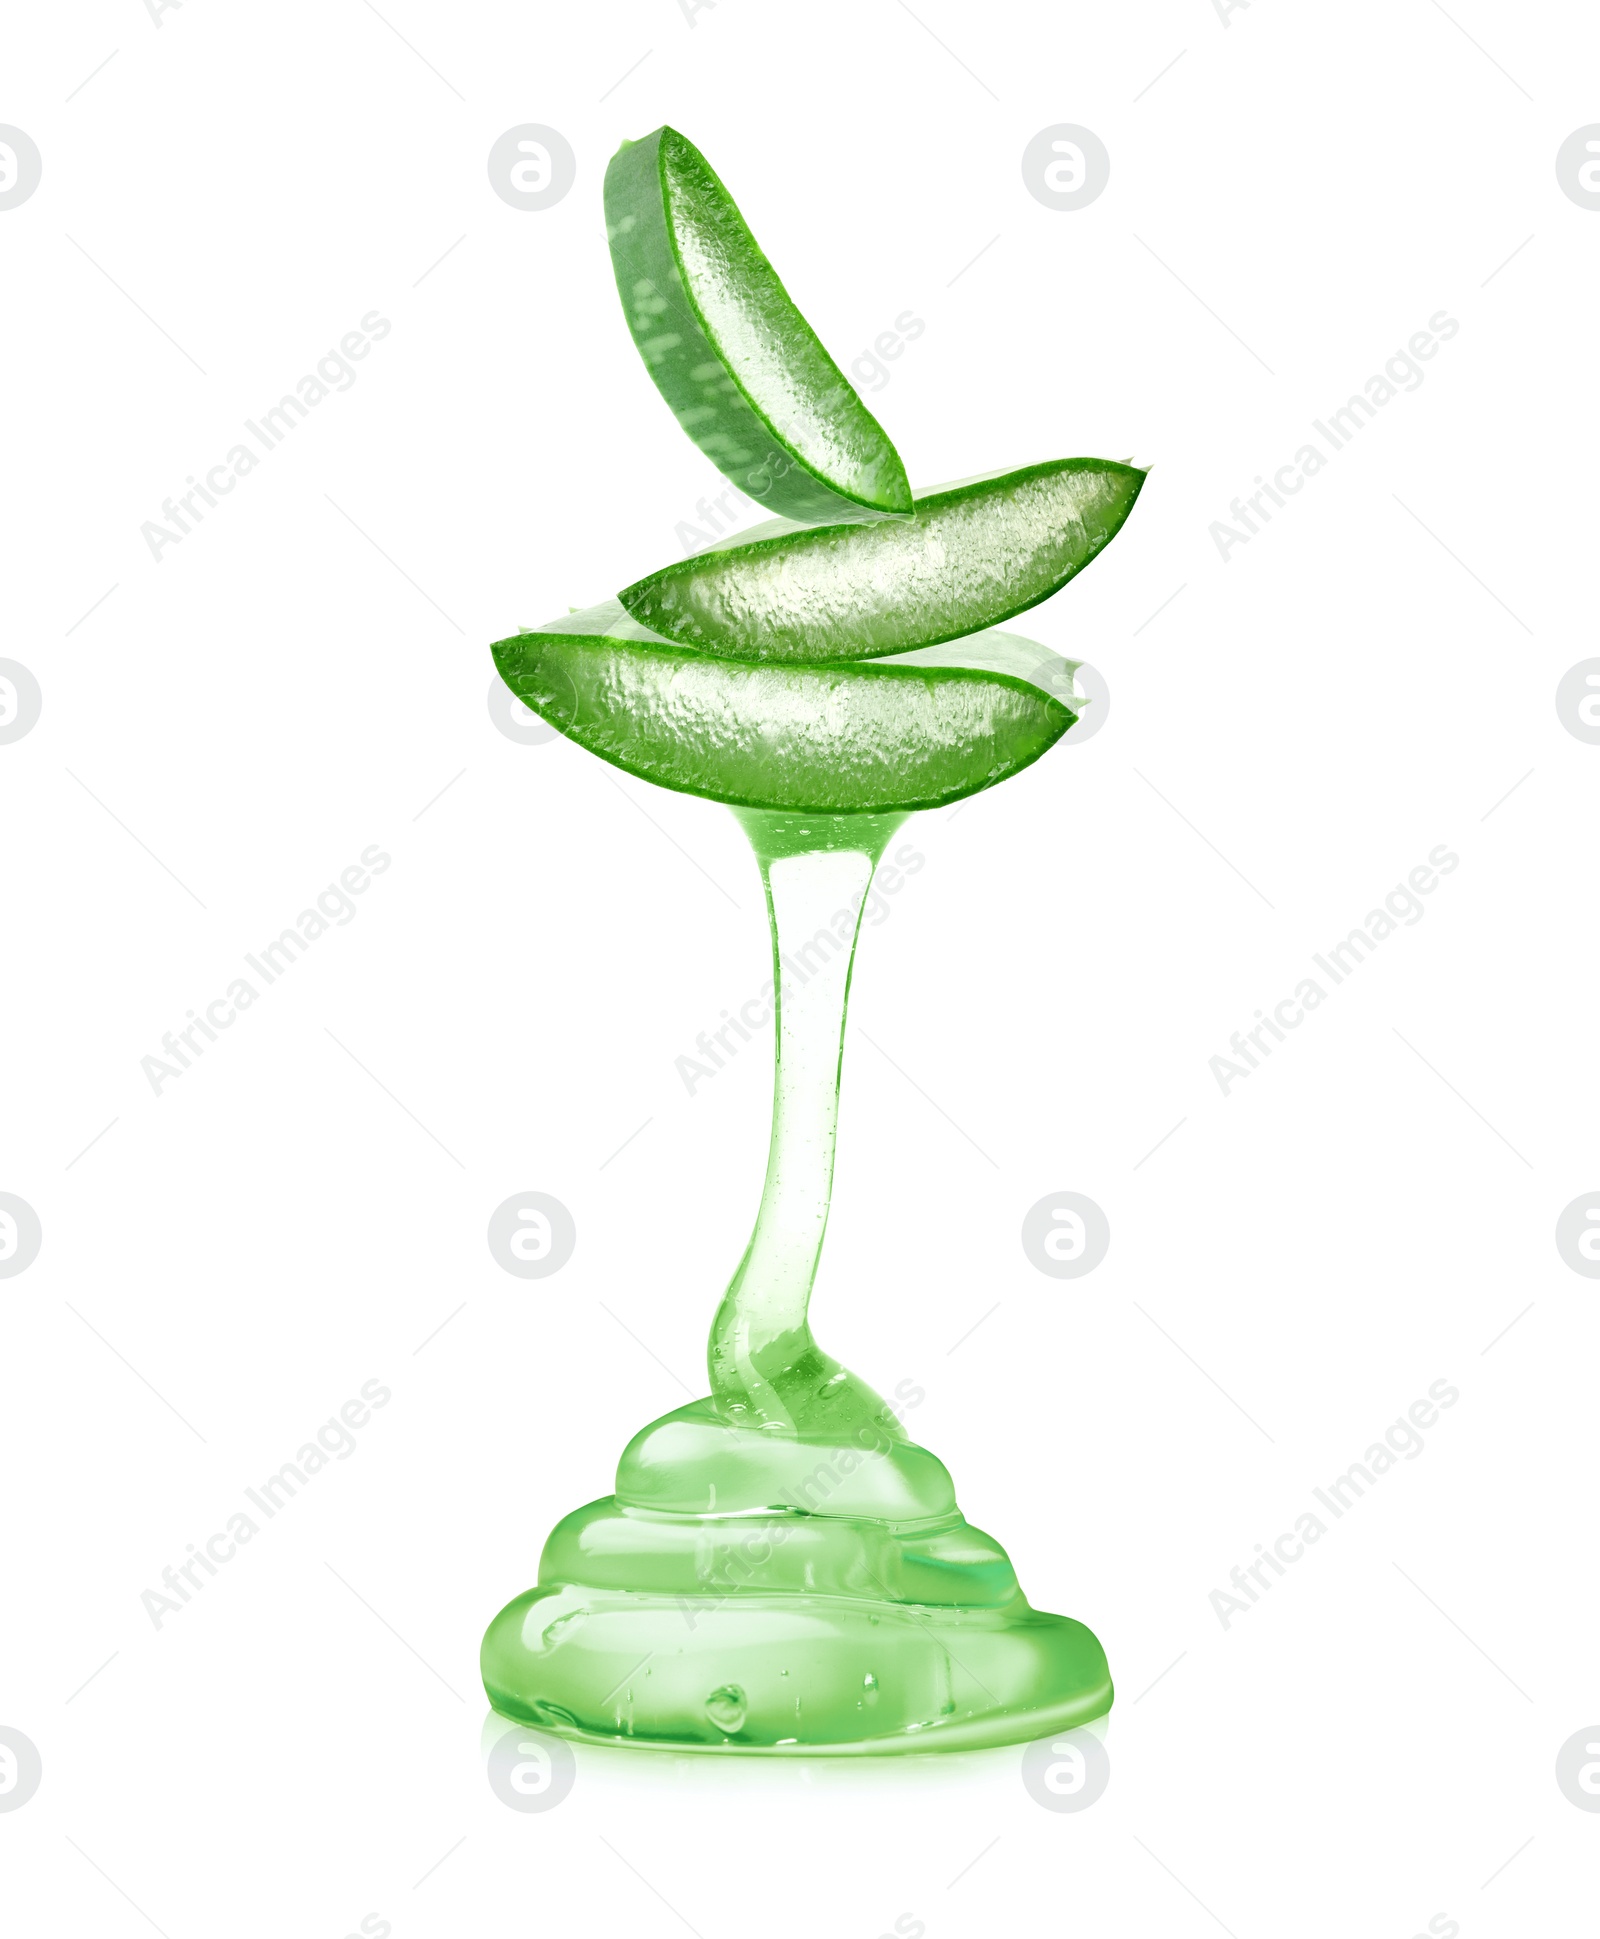 Image of Aloe vera gel flowing down from green leaf sections on white background